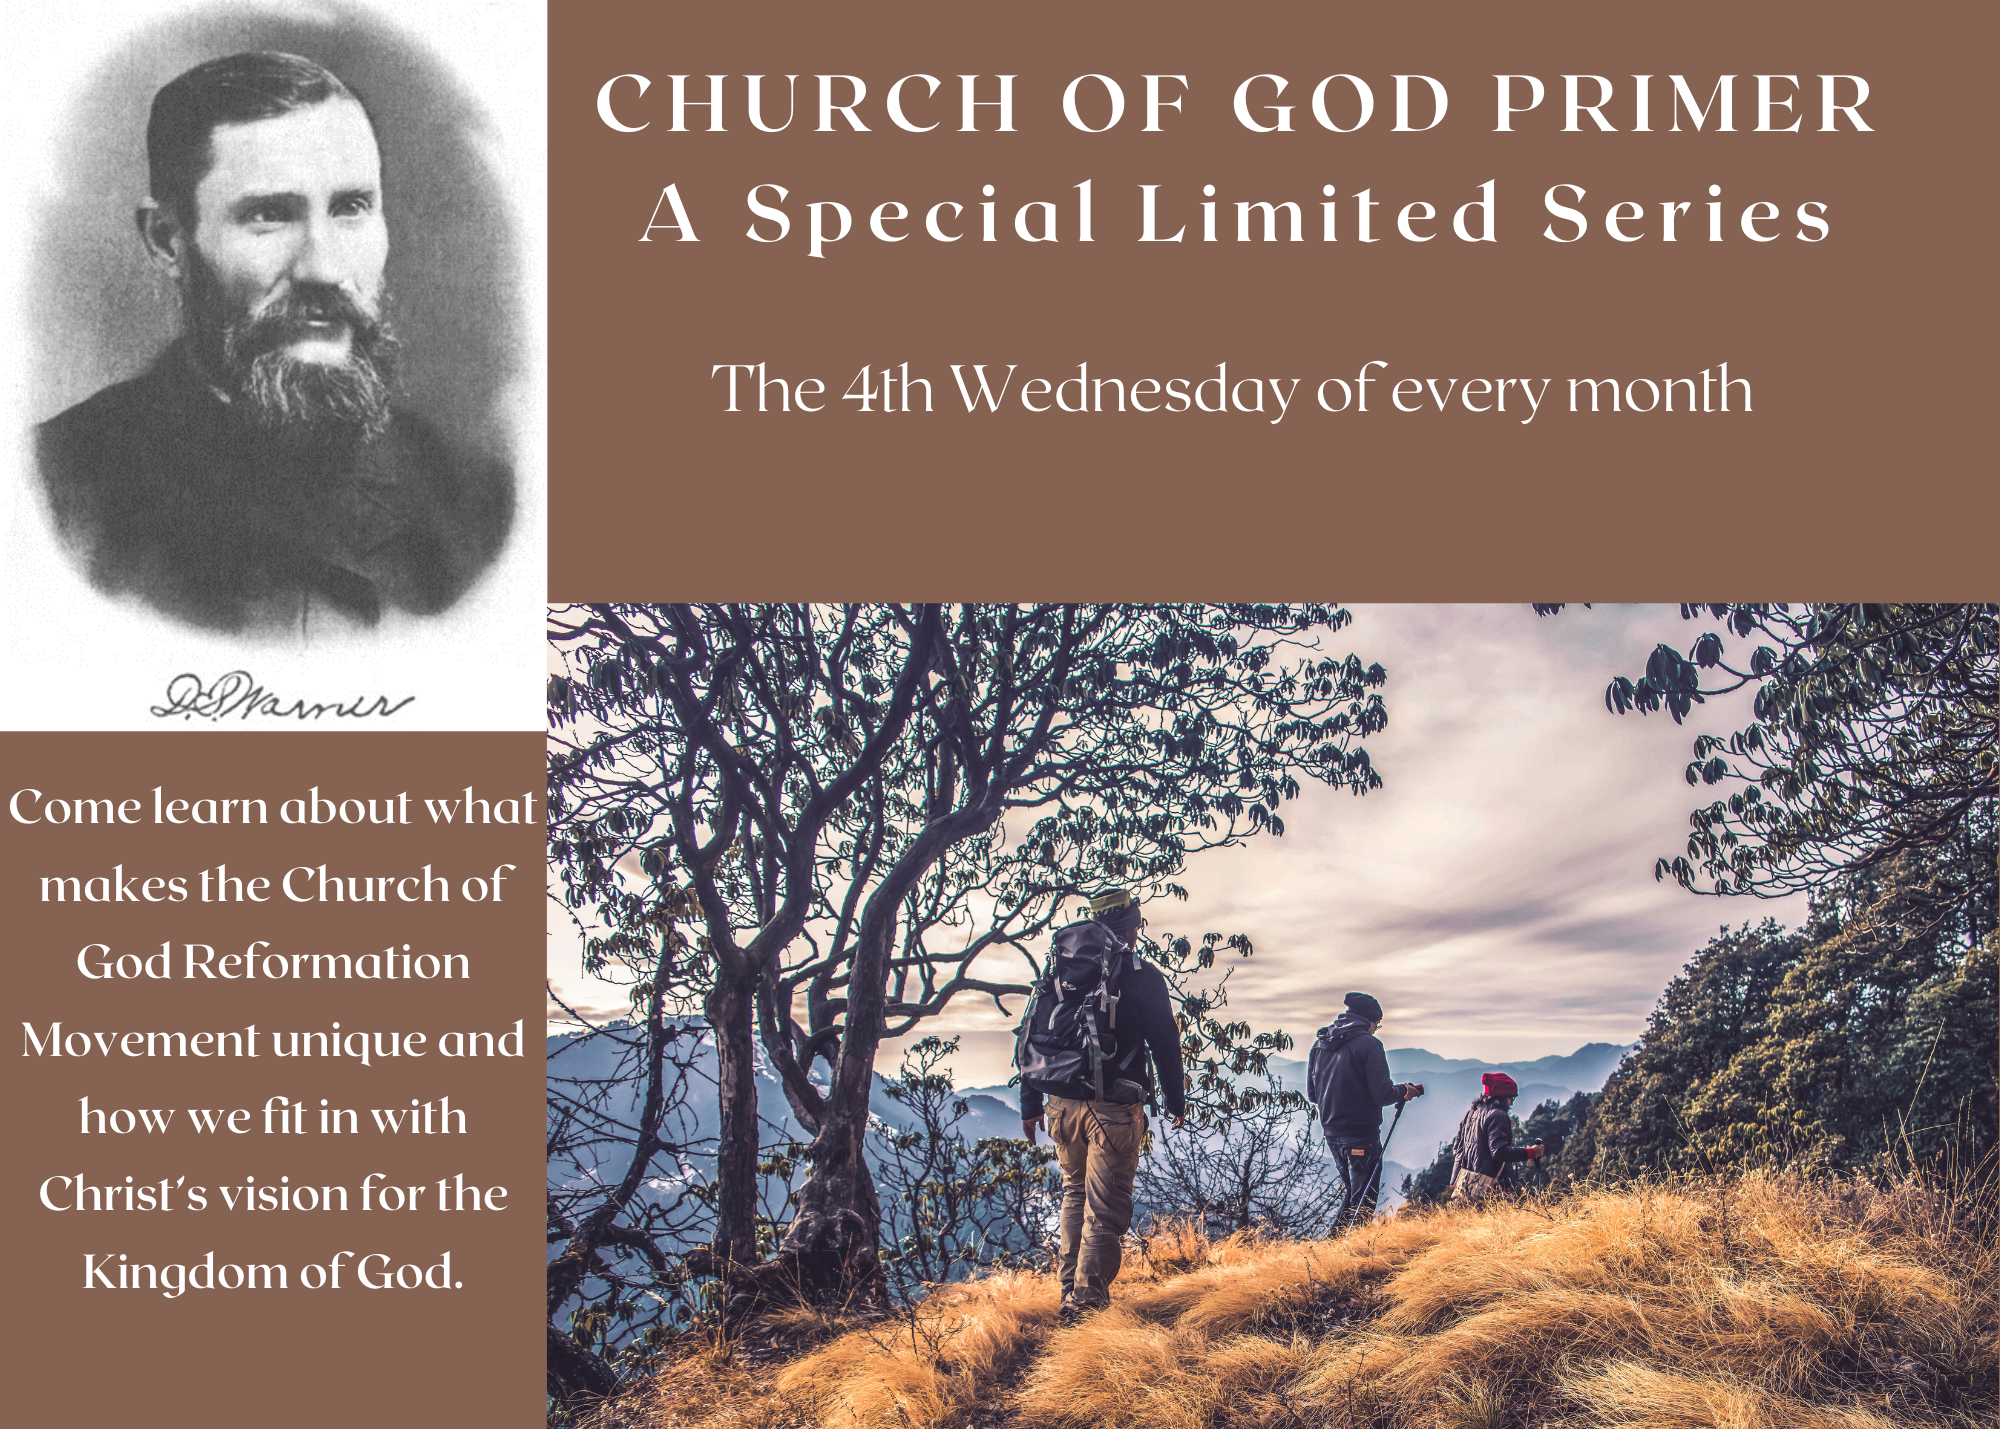 CHURCH OF GOD PRIMER A Special Limited Series The 4th Wednesday of every month. First session Feb 22nd at 630PM Come learn about what makes the Church of God Reformation Movement unique and how we fit in with Ch (5).png